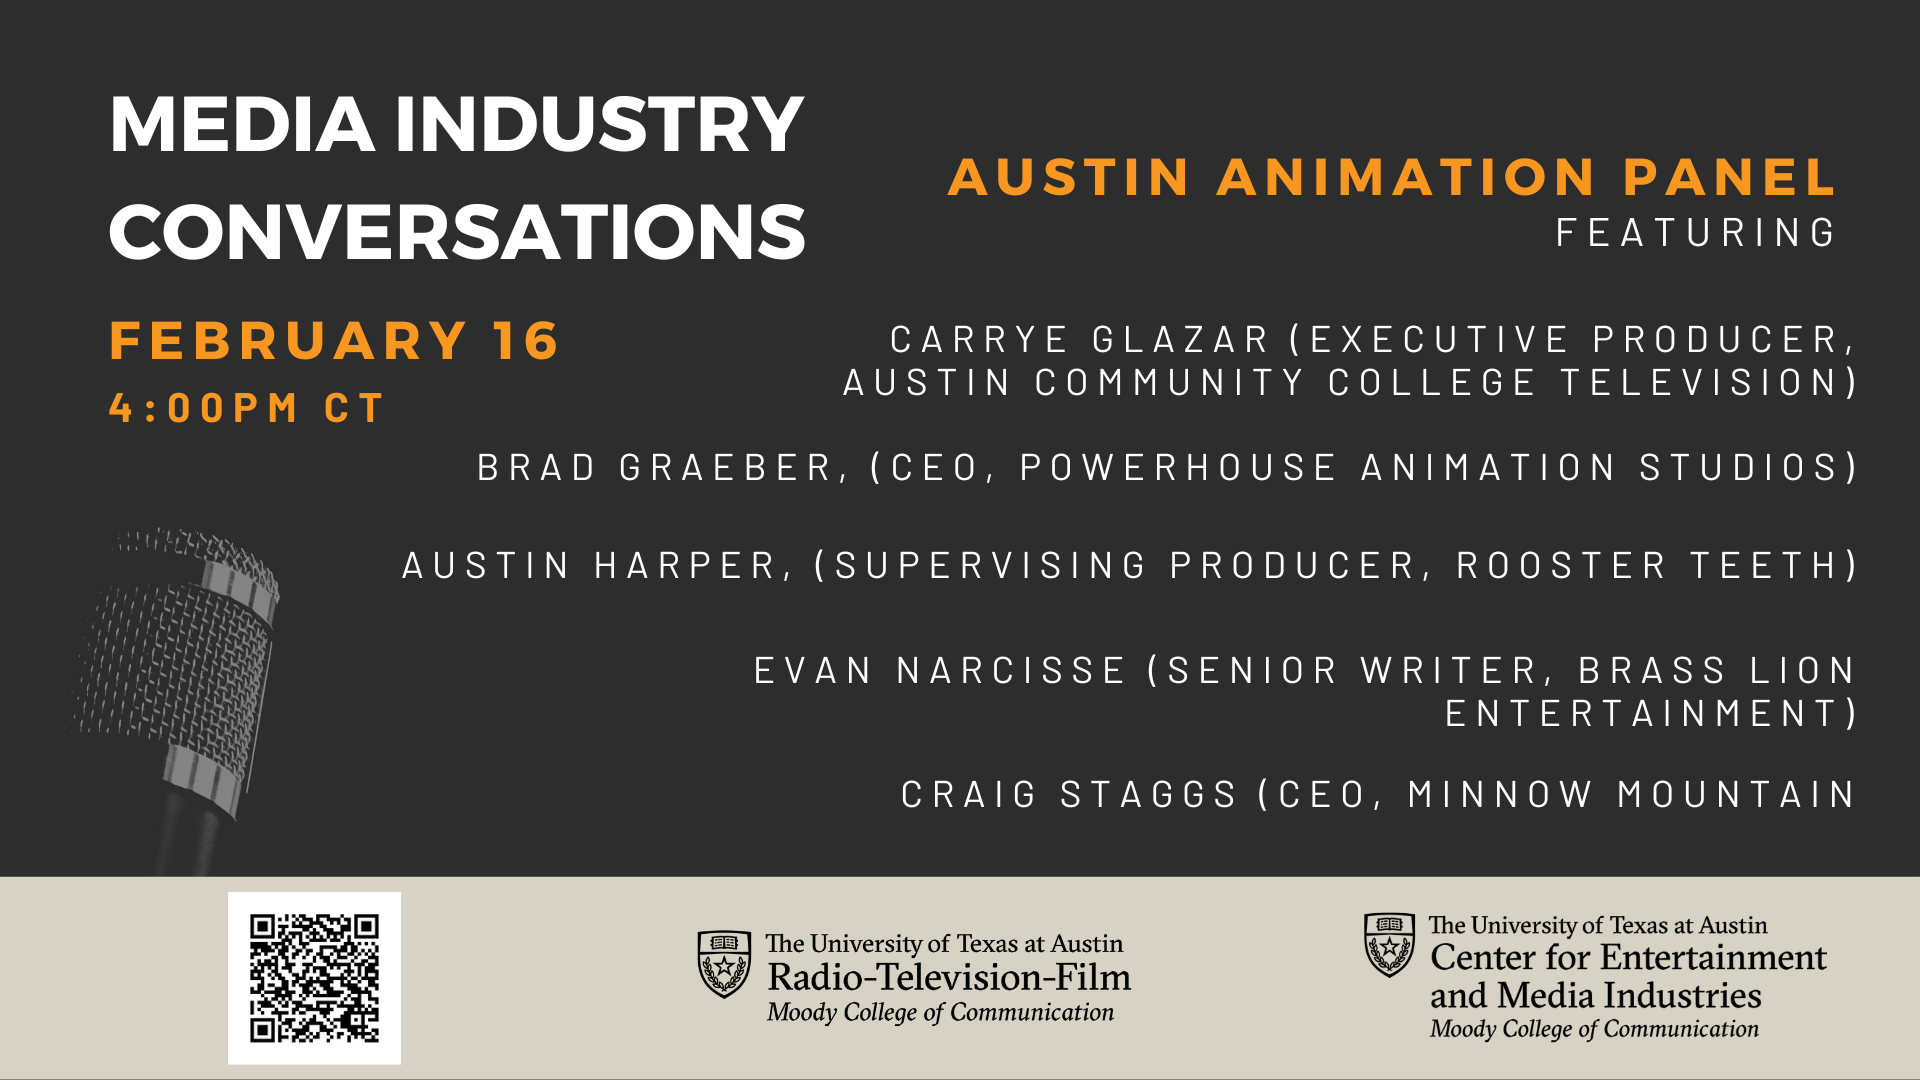 Austin Animation Panel, February 16, 4pm Panelists include Carrye Glazar (Executive Producer, Austin Community College Television), Brad Graeber, (CEO, Powerhouse Animation Studios), Austin Harper, (Supervising Producer, Rooster Teeth), Evan Narcisse (Senior Writer, Brass Lion Entertainment), and Craig Staggs (CEO, Minnow Mountain).